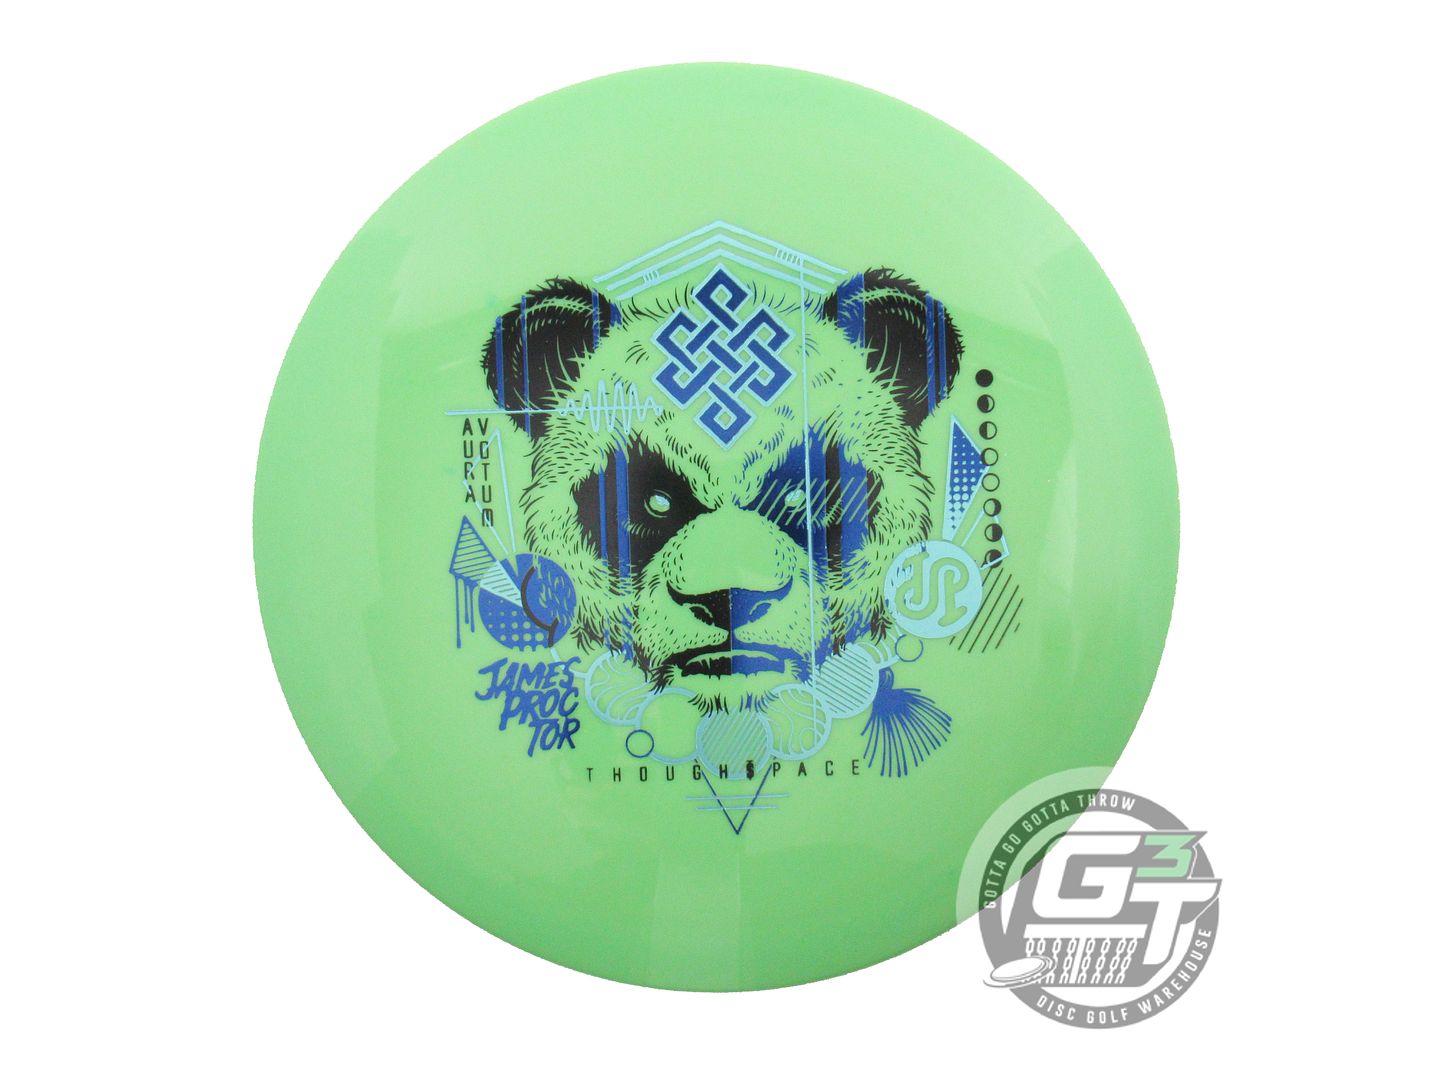 Thought Space Athletics Limited Edition 2023 Signature Series James Proctor Aura Votum Fairway Driver Golf Disc (Individually Listed)